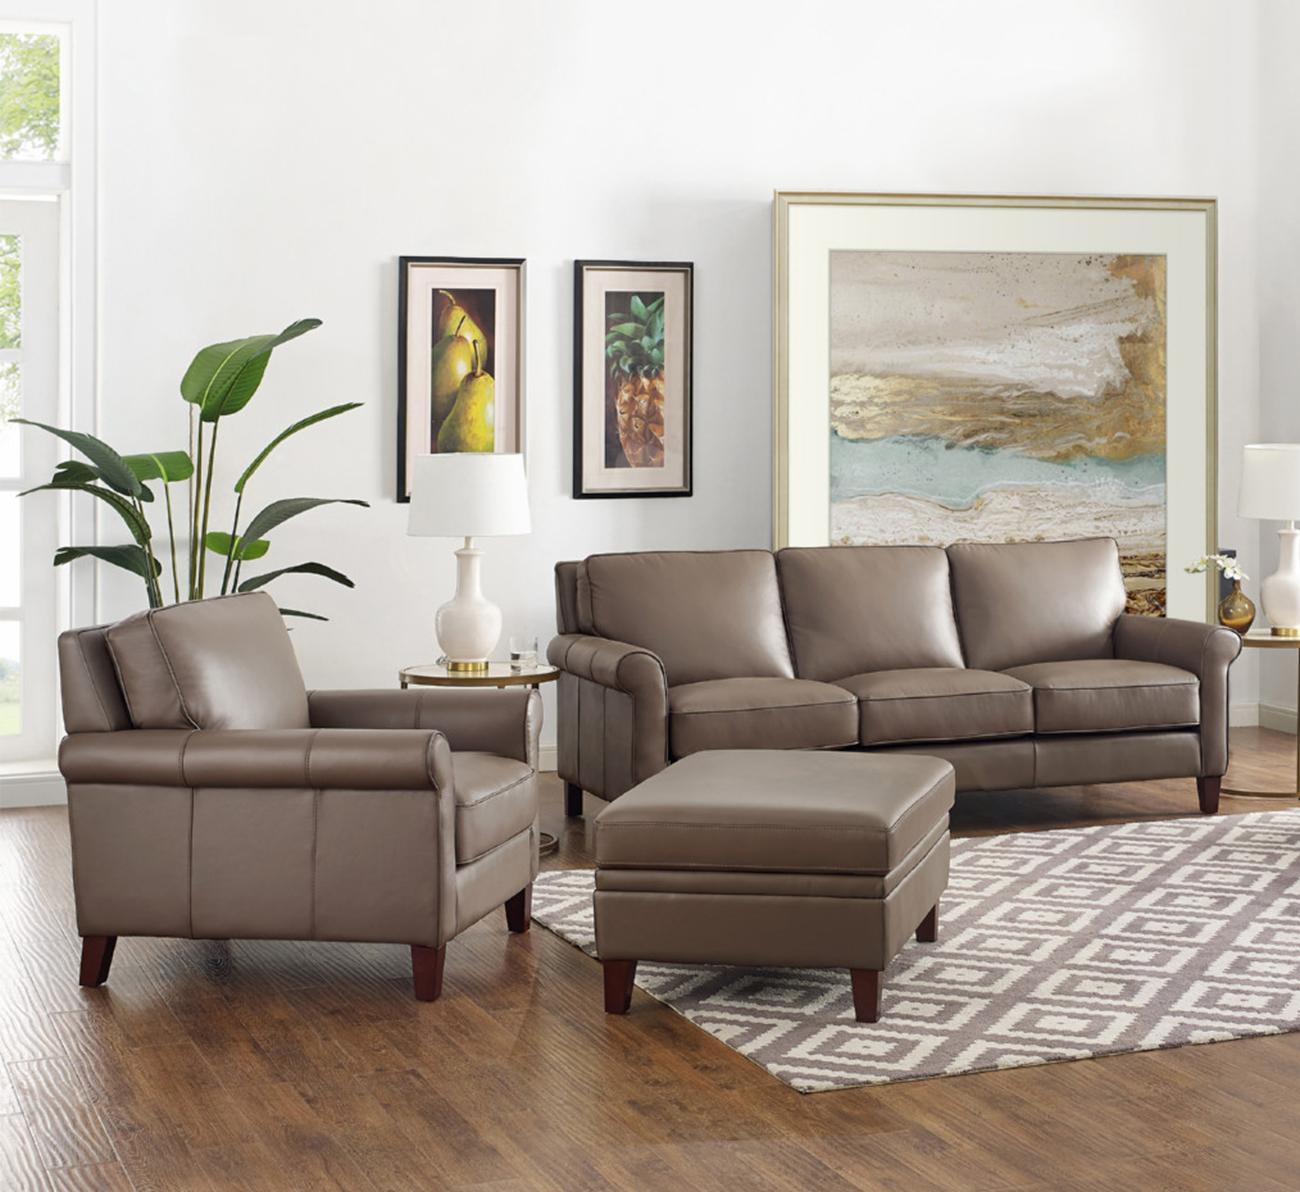 Classic, Traditional Sofa Set NEW LONDON TAUPE 6671 NEW LONDON TAUPE 6671-Set-3 in Brown Top grain leather